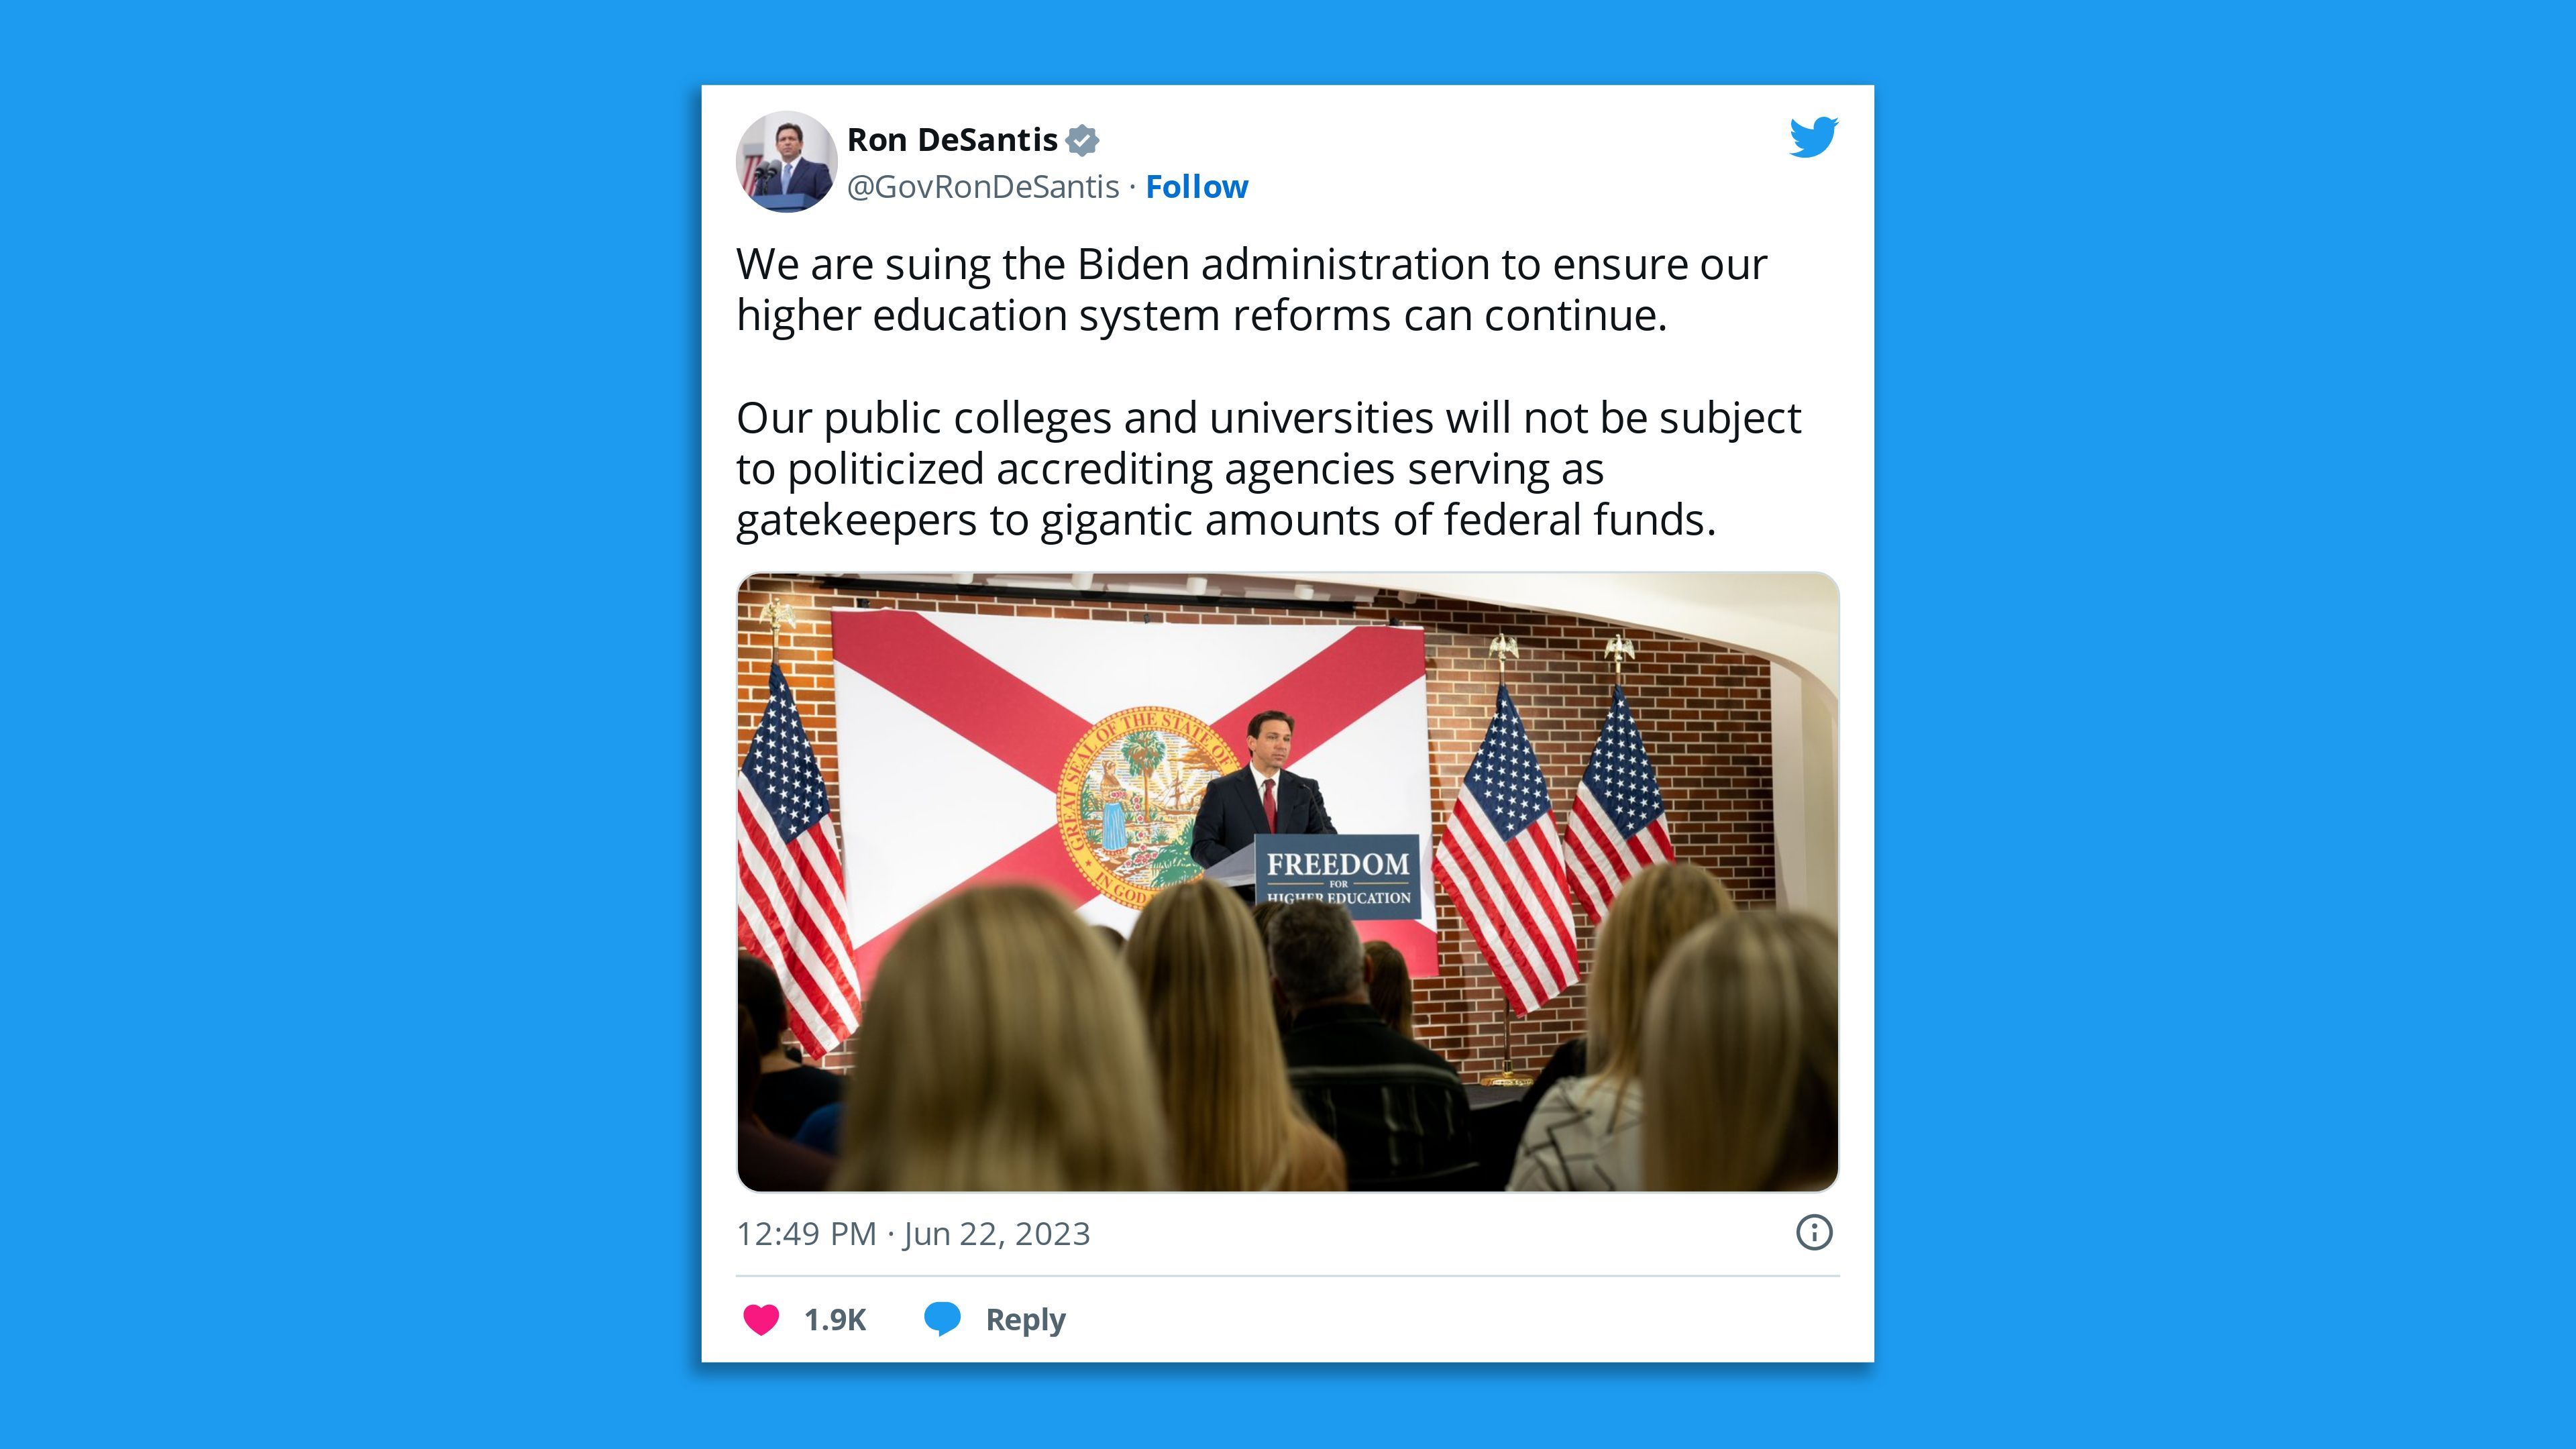 A screenshot of a tweet by Florida Gov. Ron DeSantis saying: "We are suing the Biden administration to ensure our higher education system reforms can continue.   Our public colleges and universities will not be subject to politicized accrediting agencies serving as gatekeepers to gigantic amounts of federal funds."